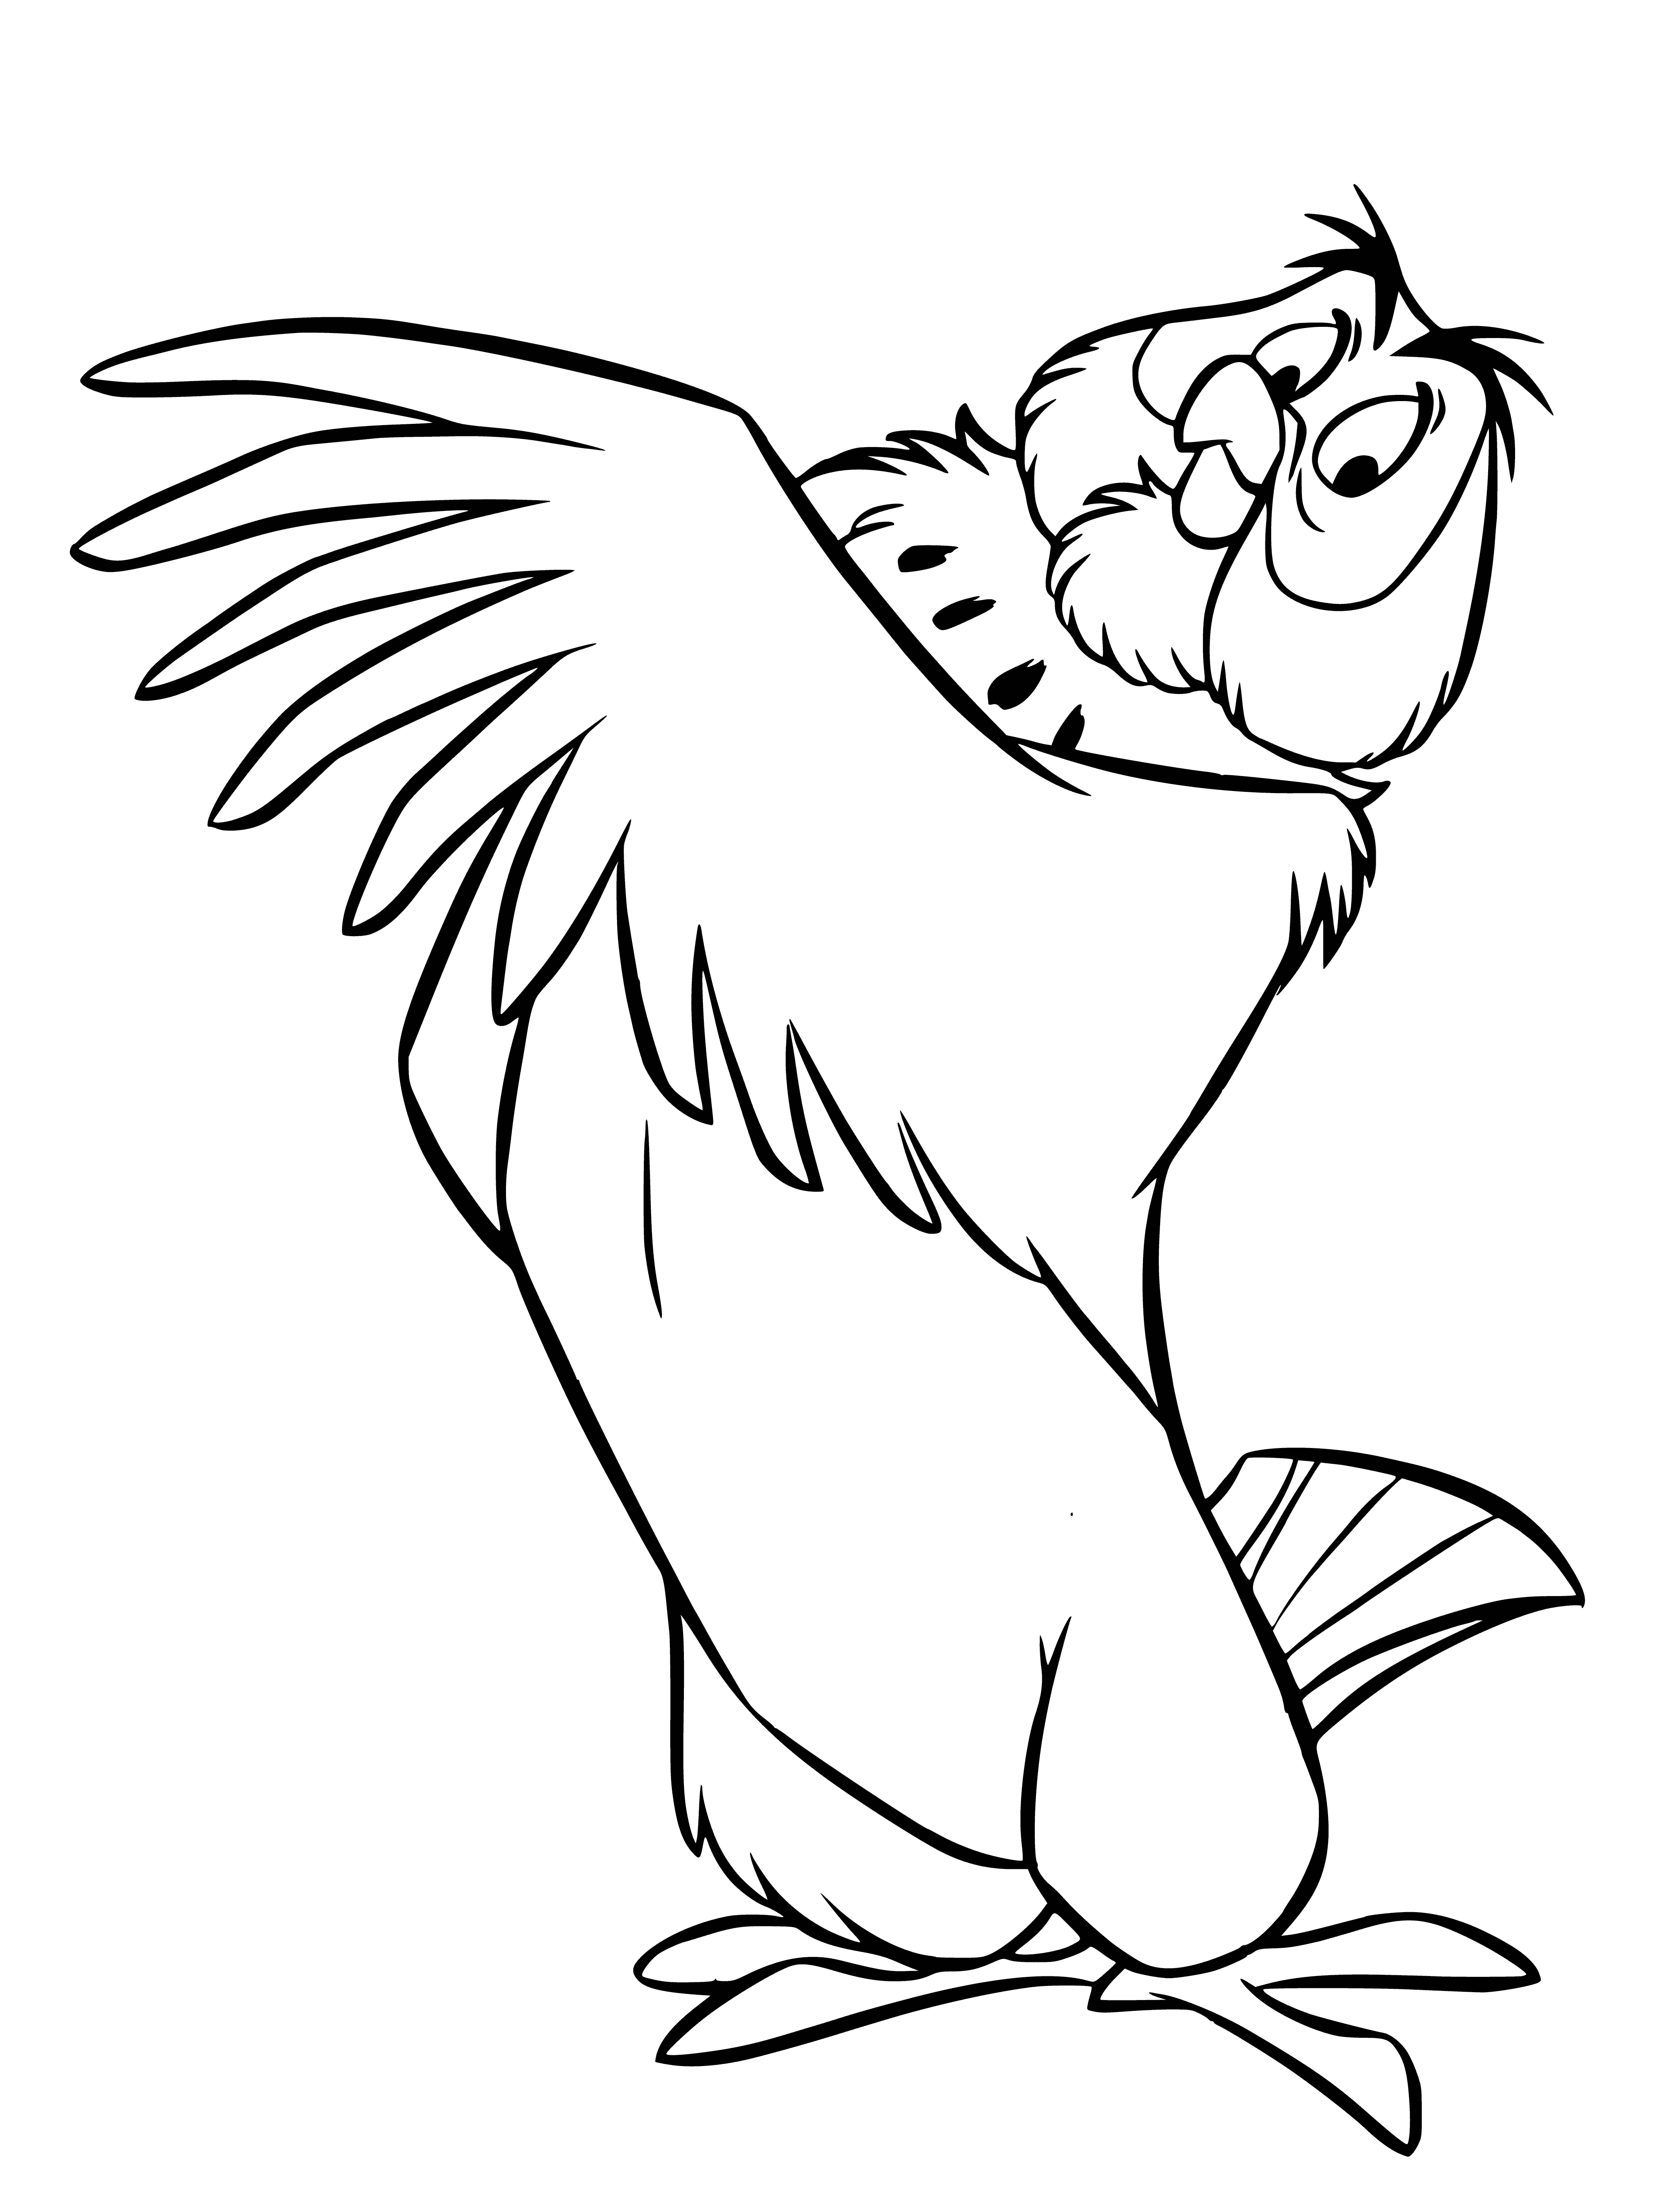 coloring page: Owl is the wise expert on Pooh's adventures. He helps solve everyone's problems with his wisdom.